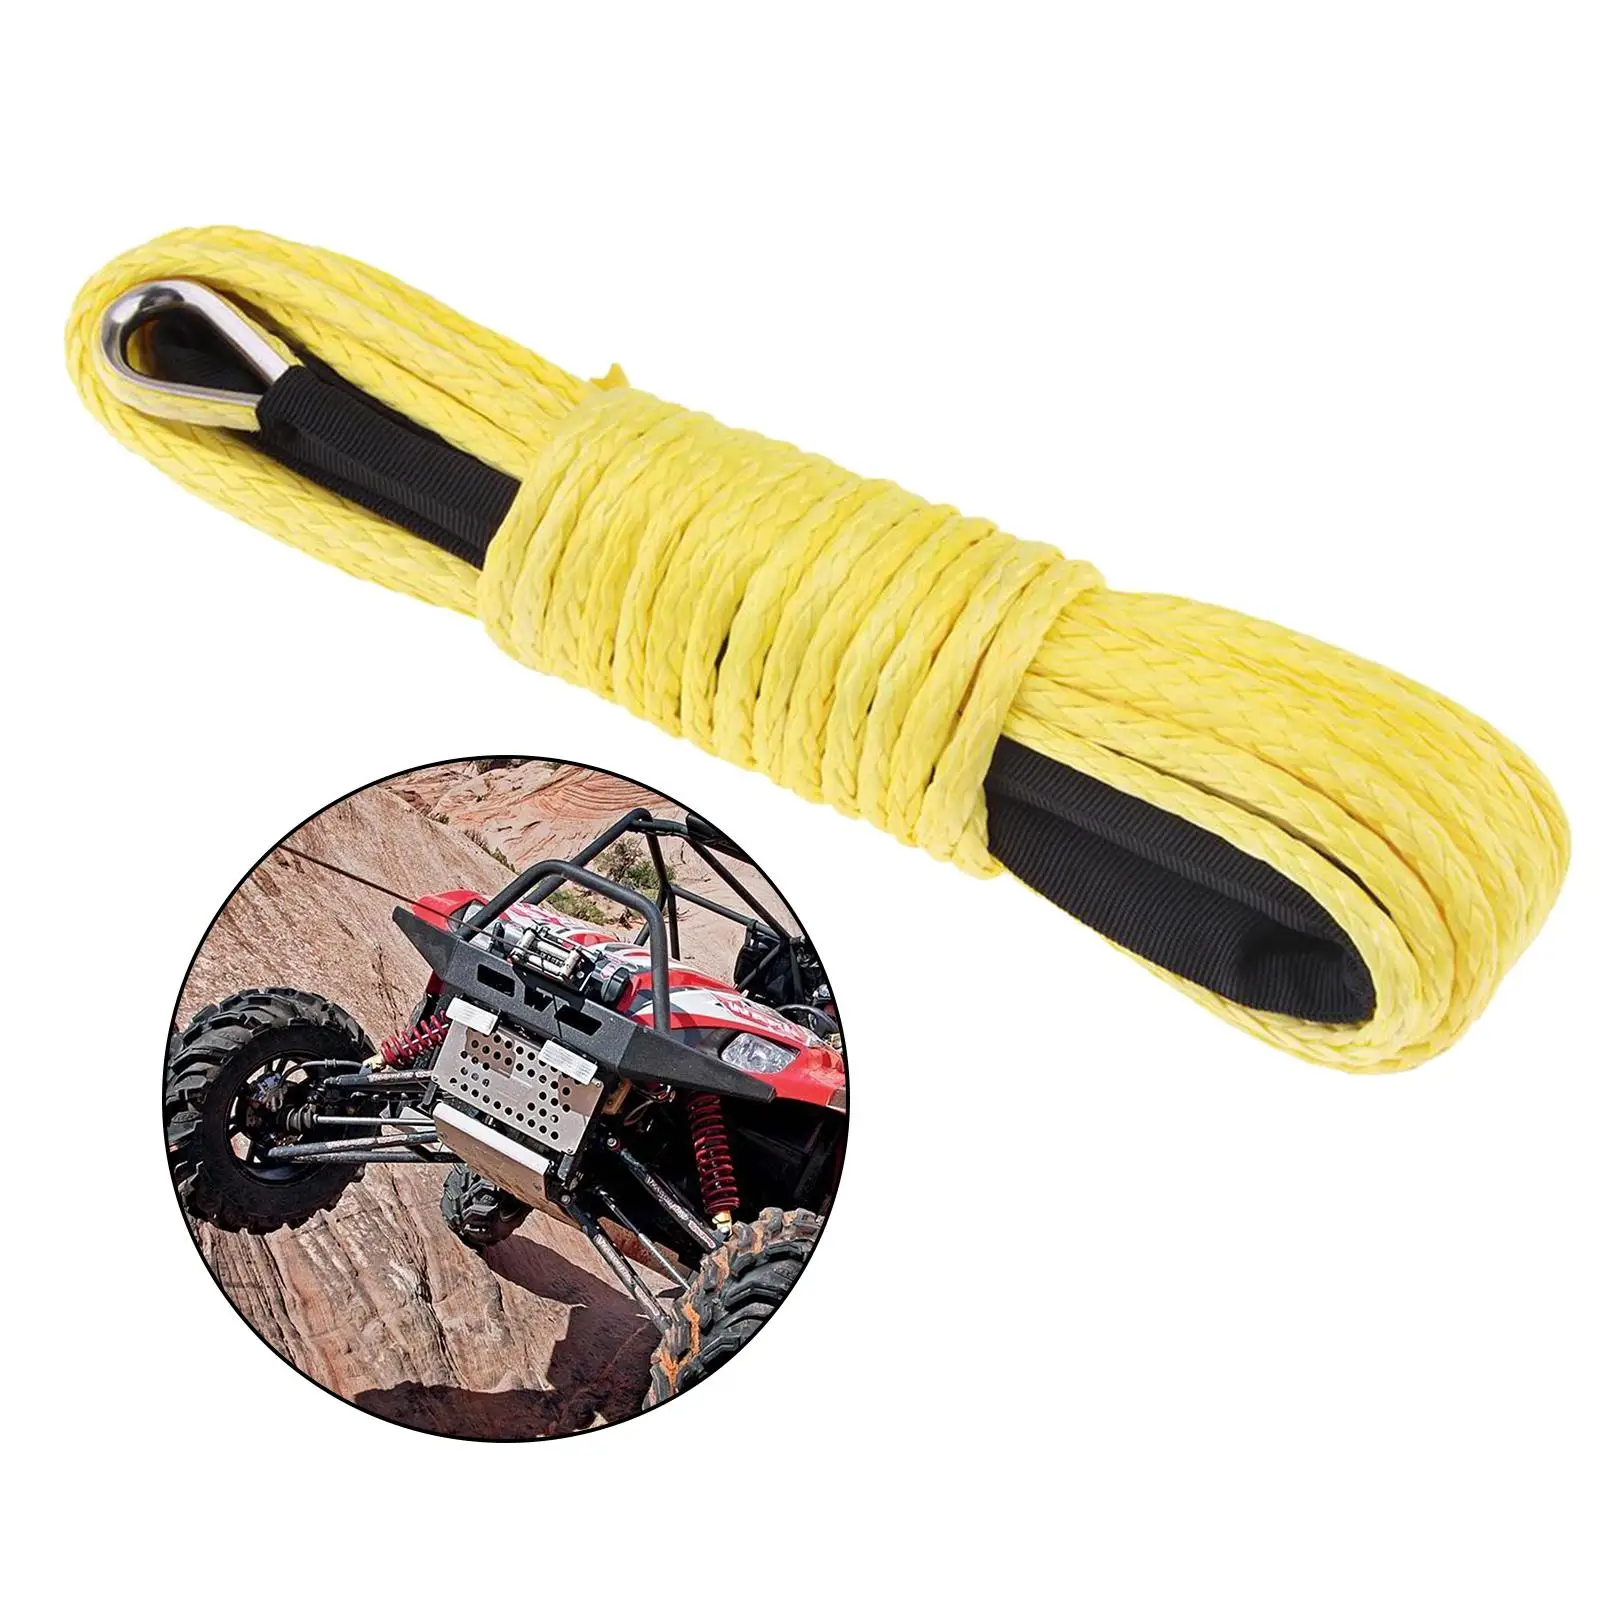 Durable 1/4 Inch x 50 Feet Synthetic Winch Line Cable Rope for ATV UTV Heavy-Duty